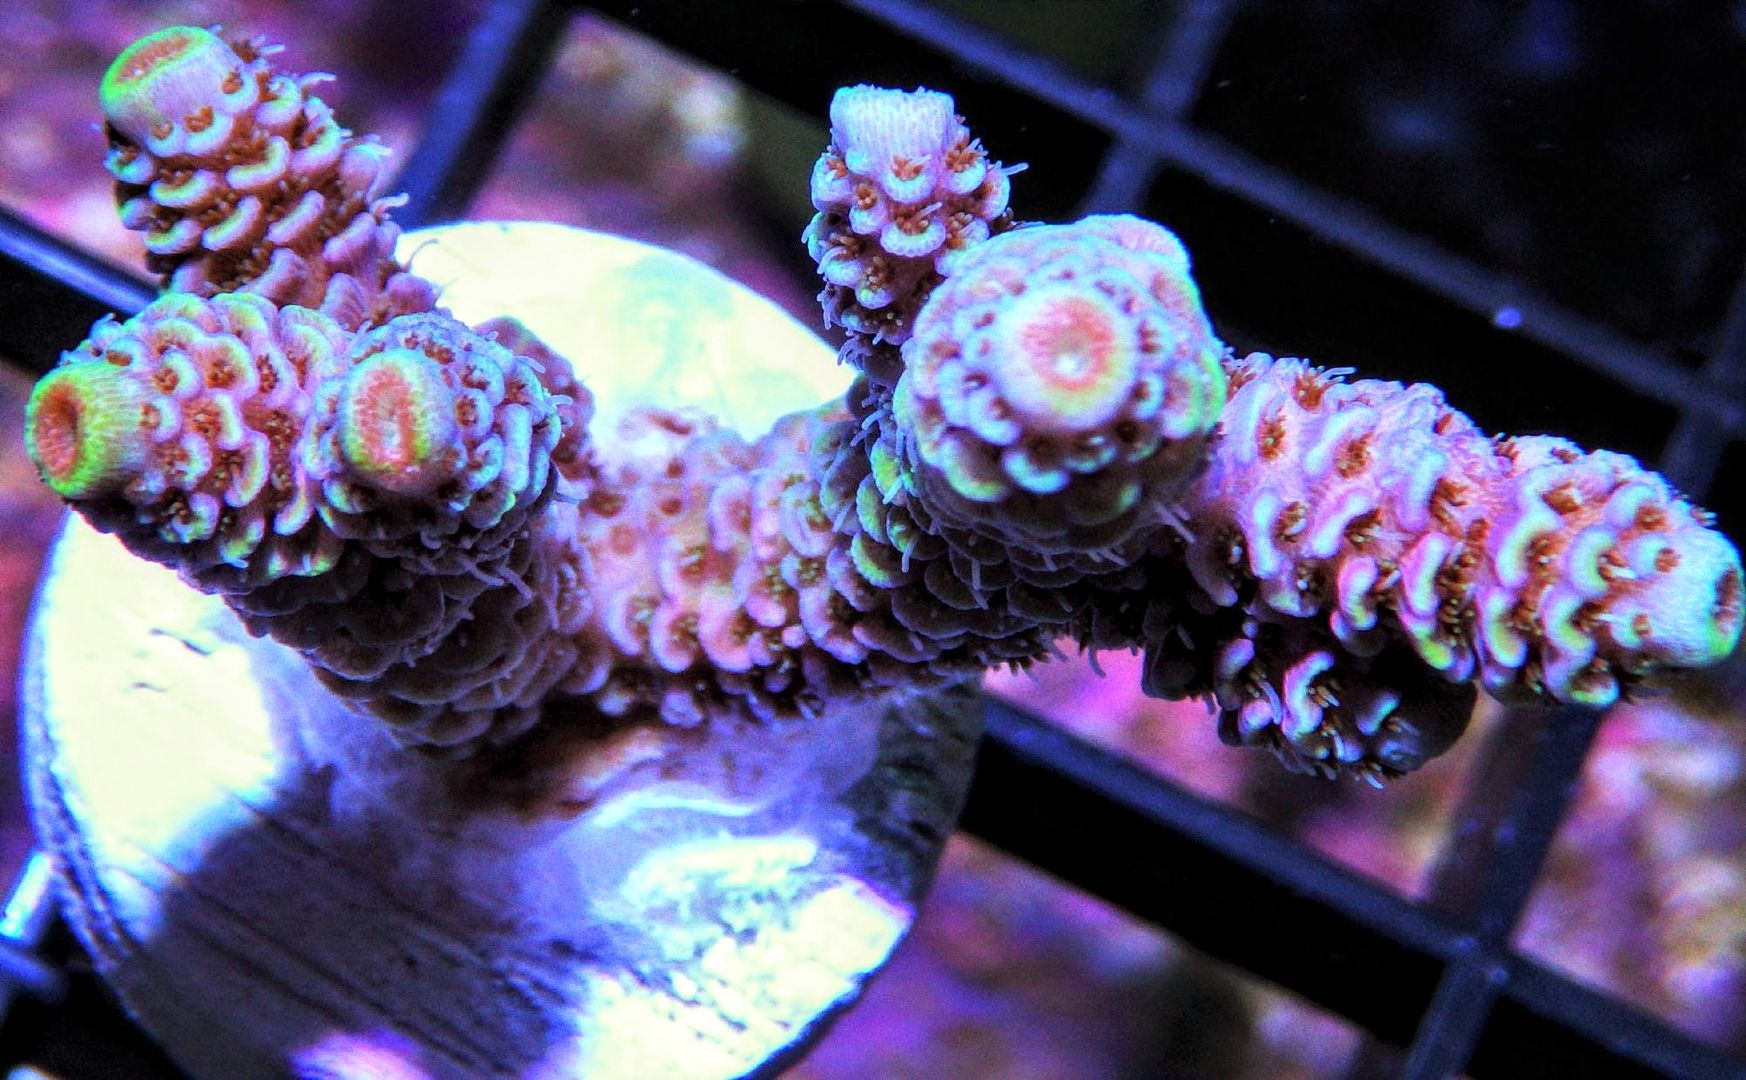 63ultraacropora24 12 zpsmxnnfeud - Bargain Frags JUST POSTED